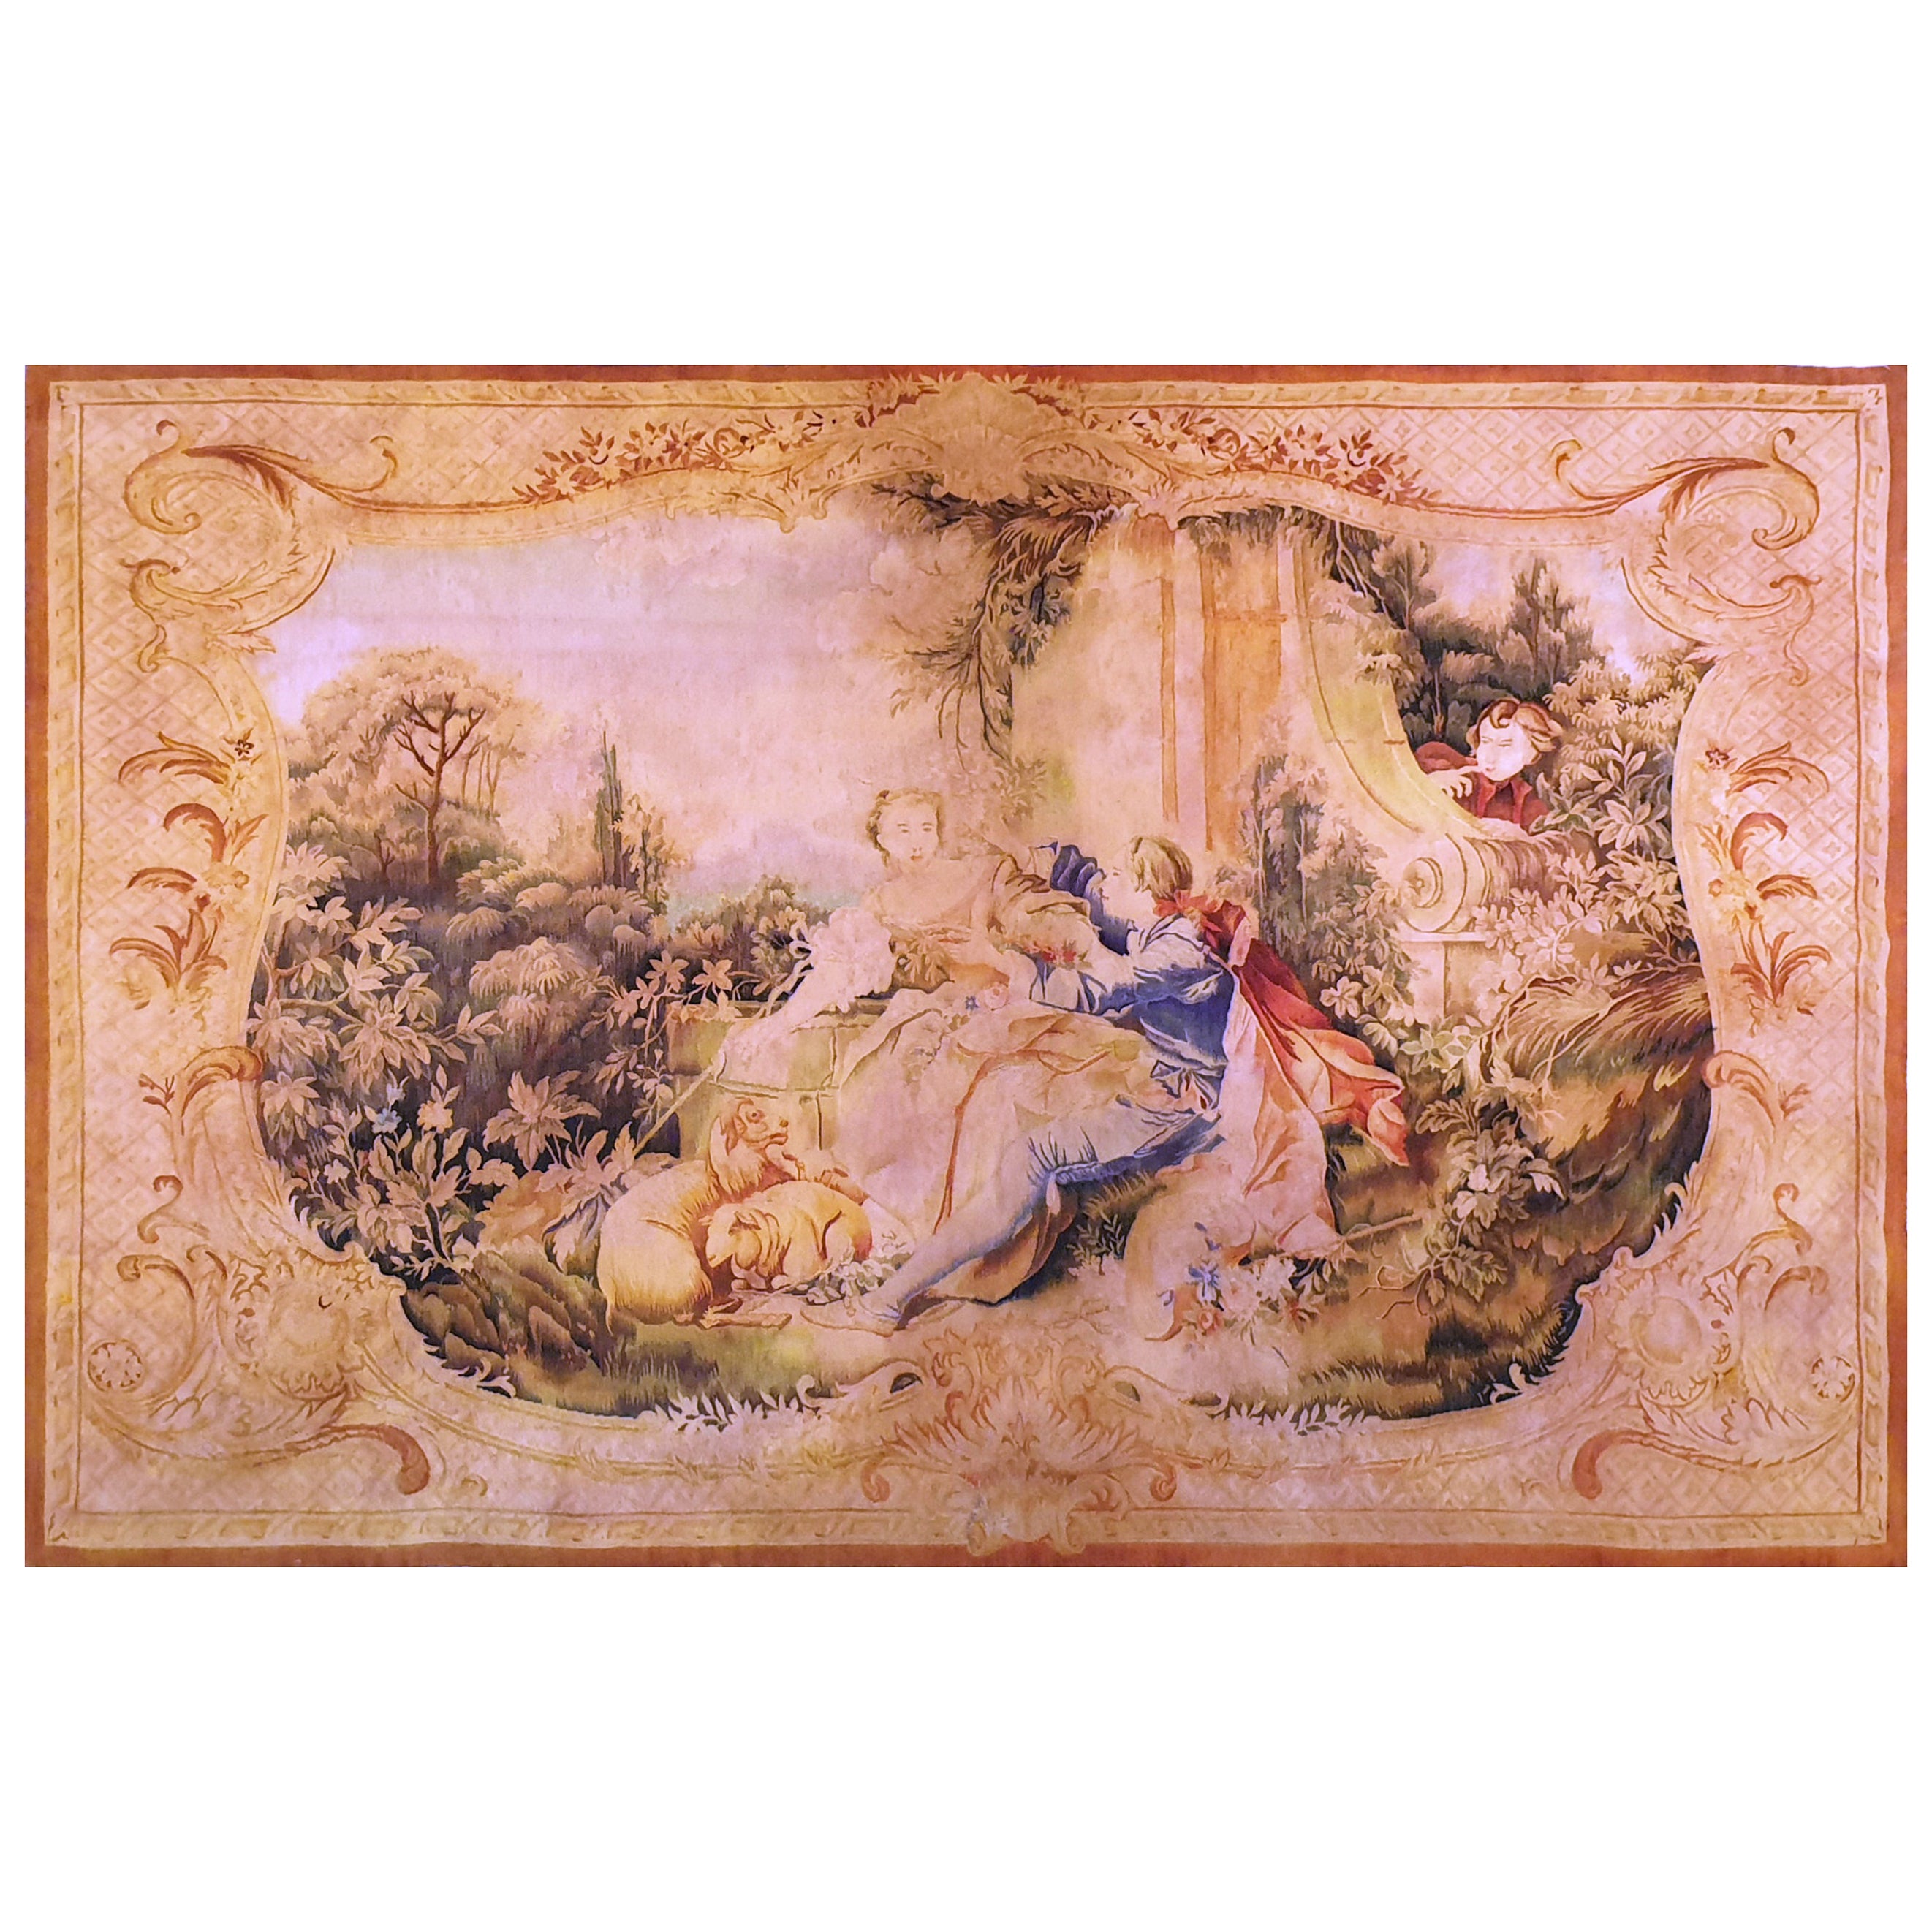 20th century Aubusson tapestry - N° 783